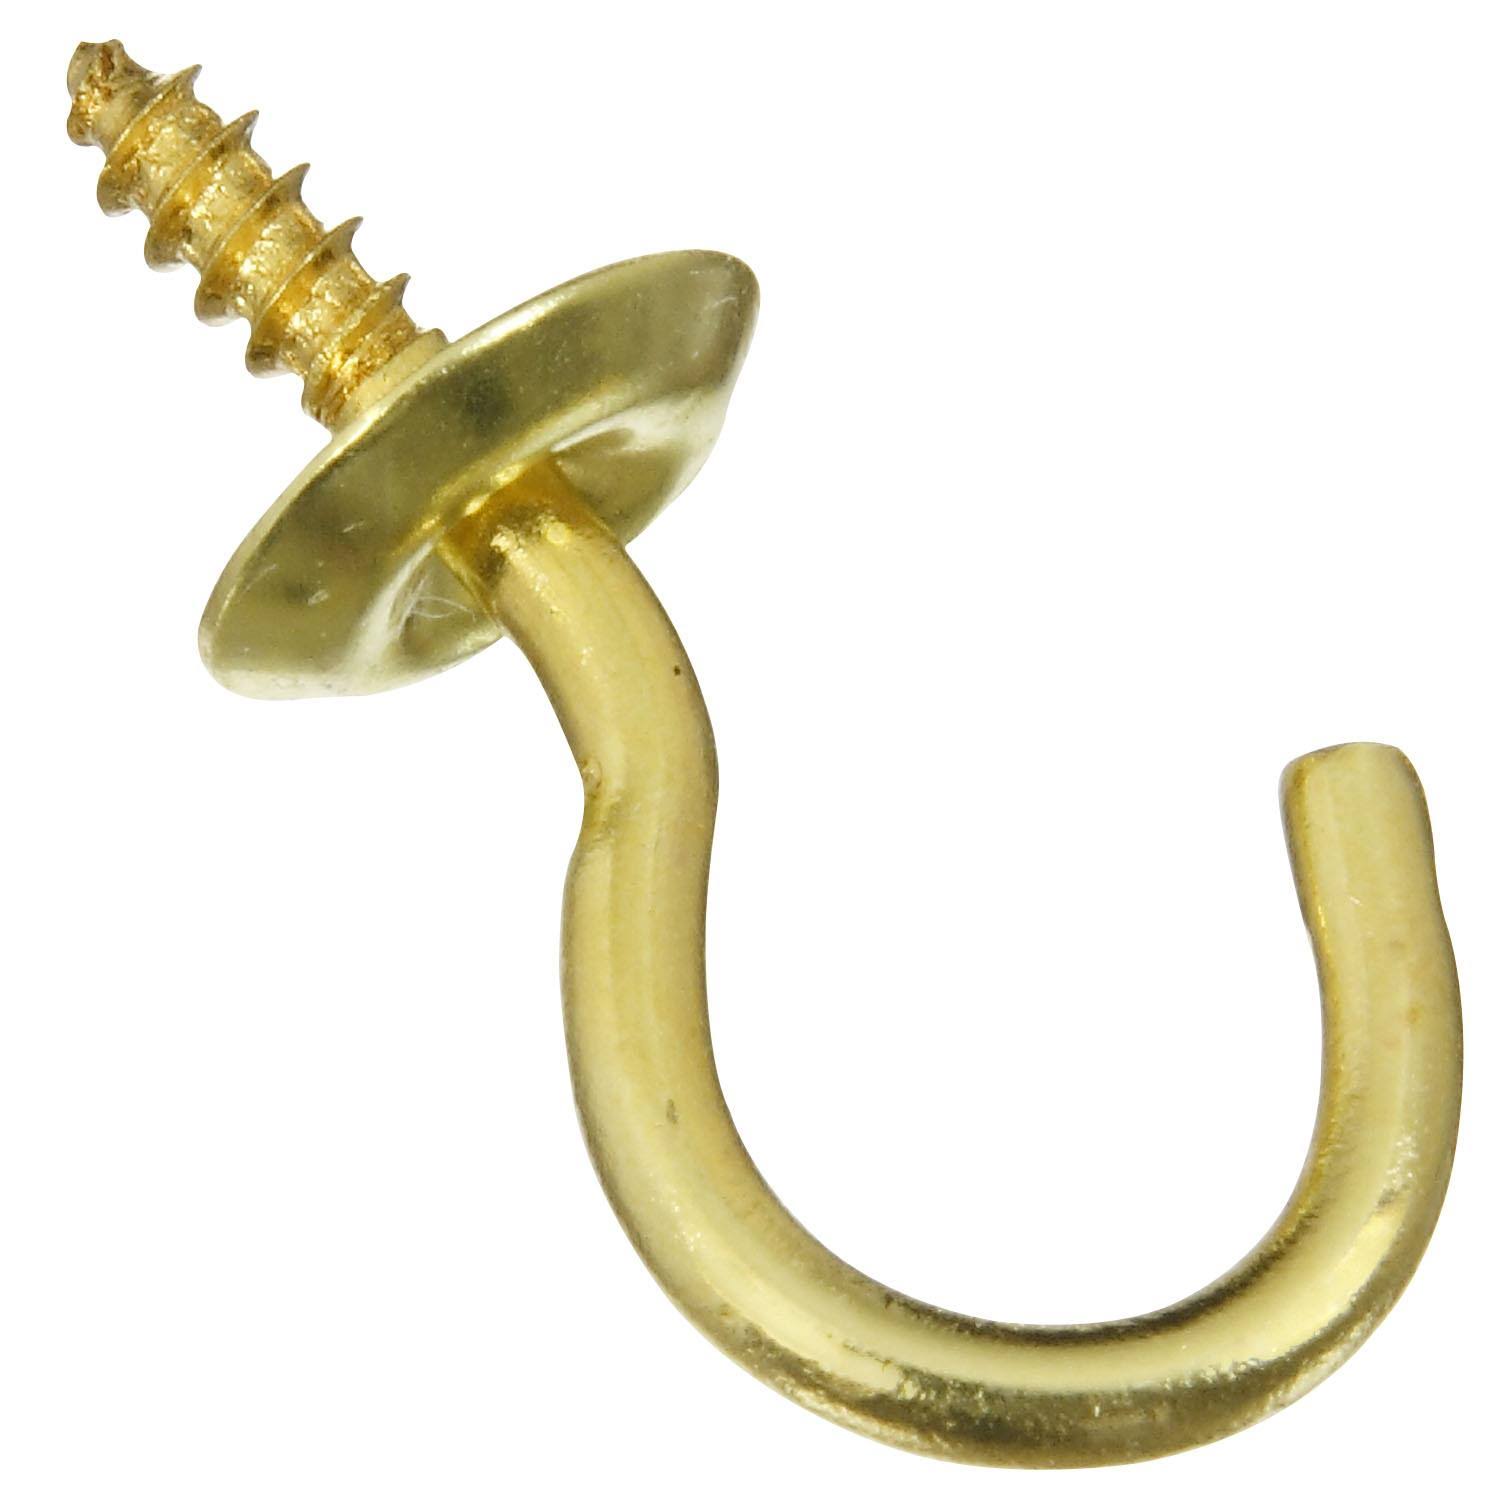 National Hardware VS2021 Cup Hook - 3/4"in